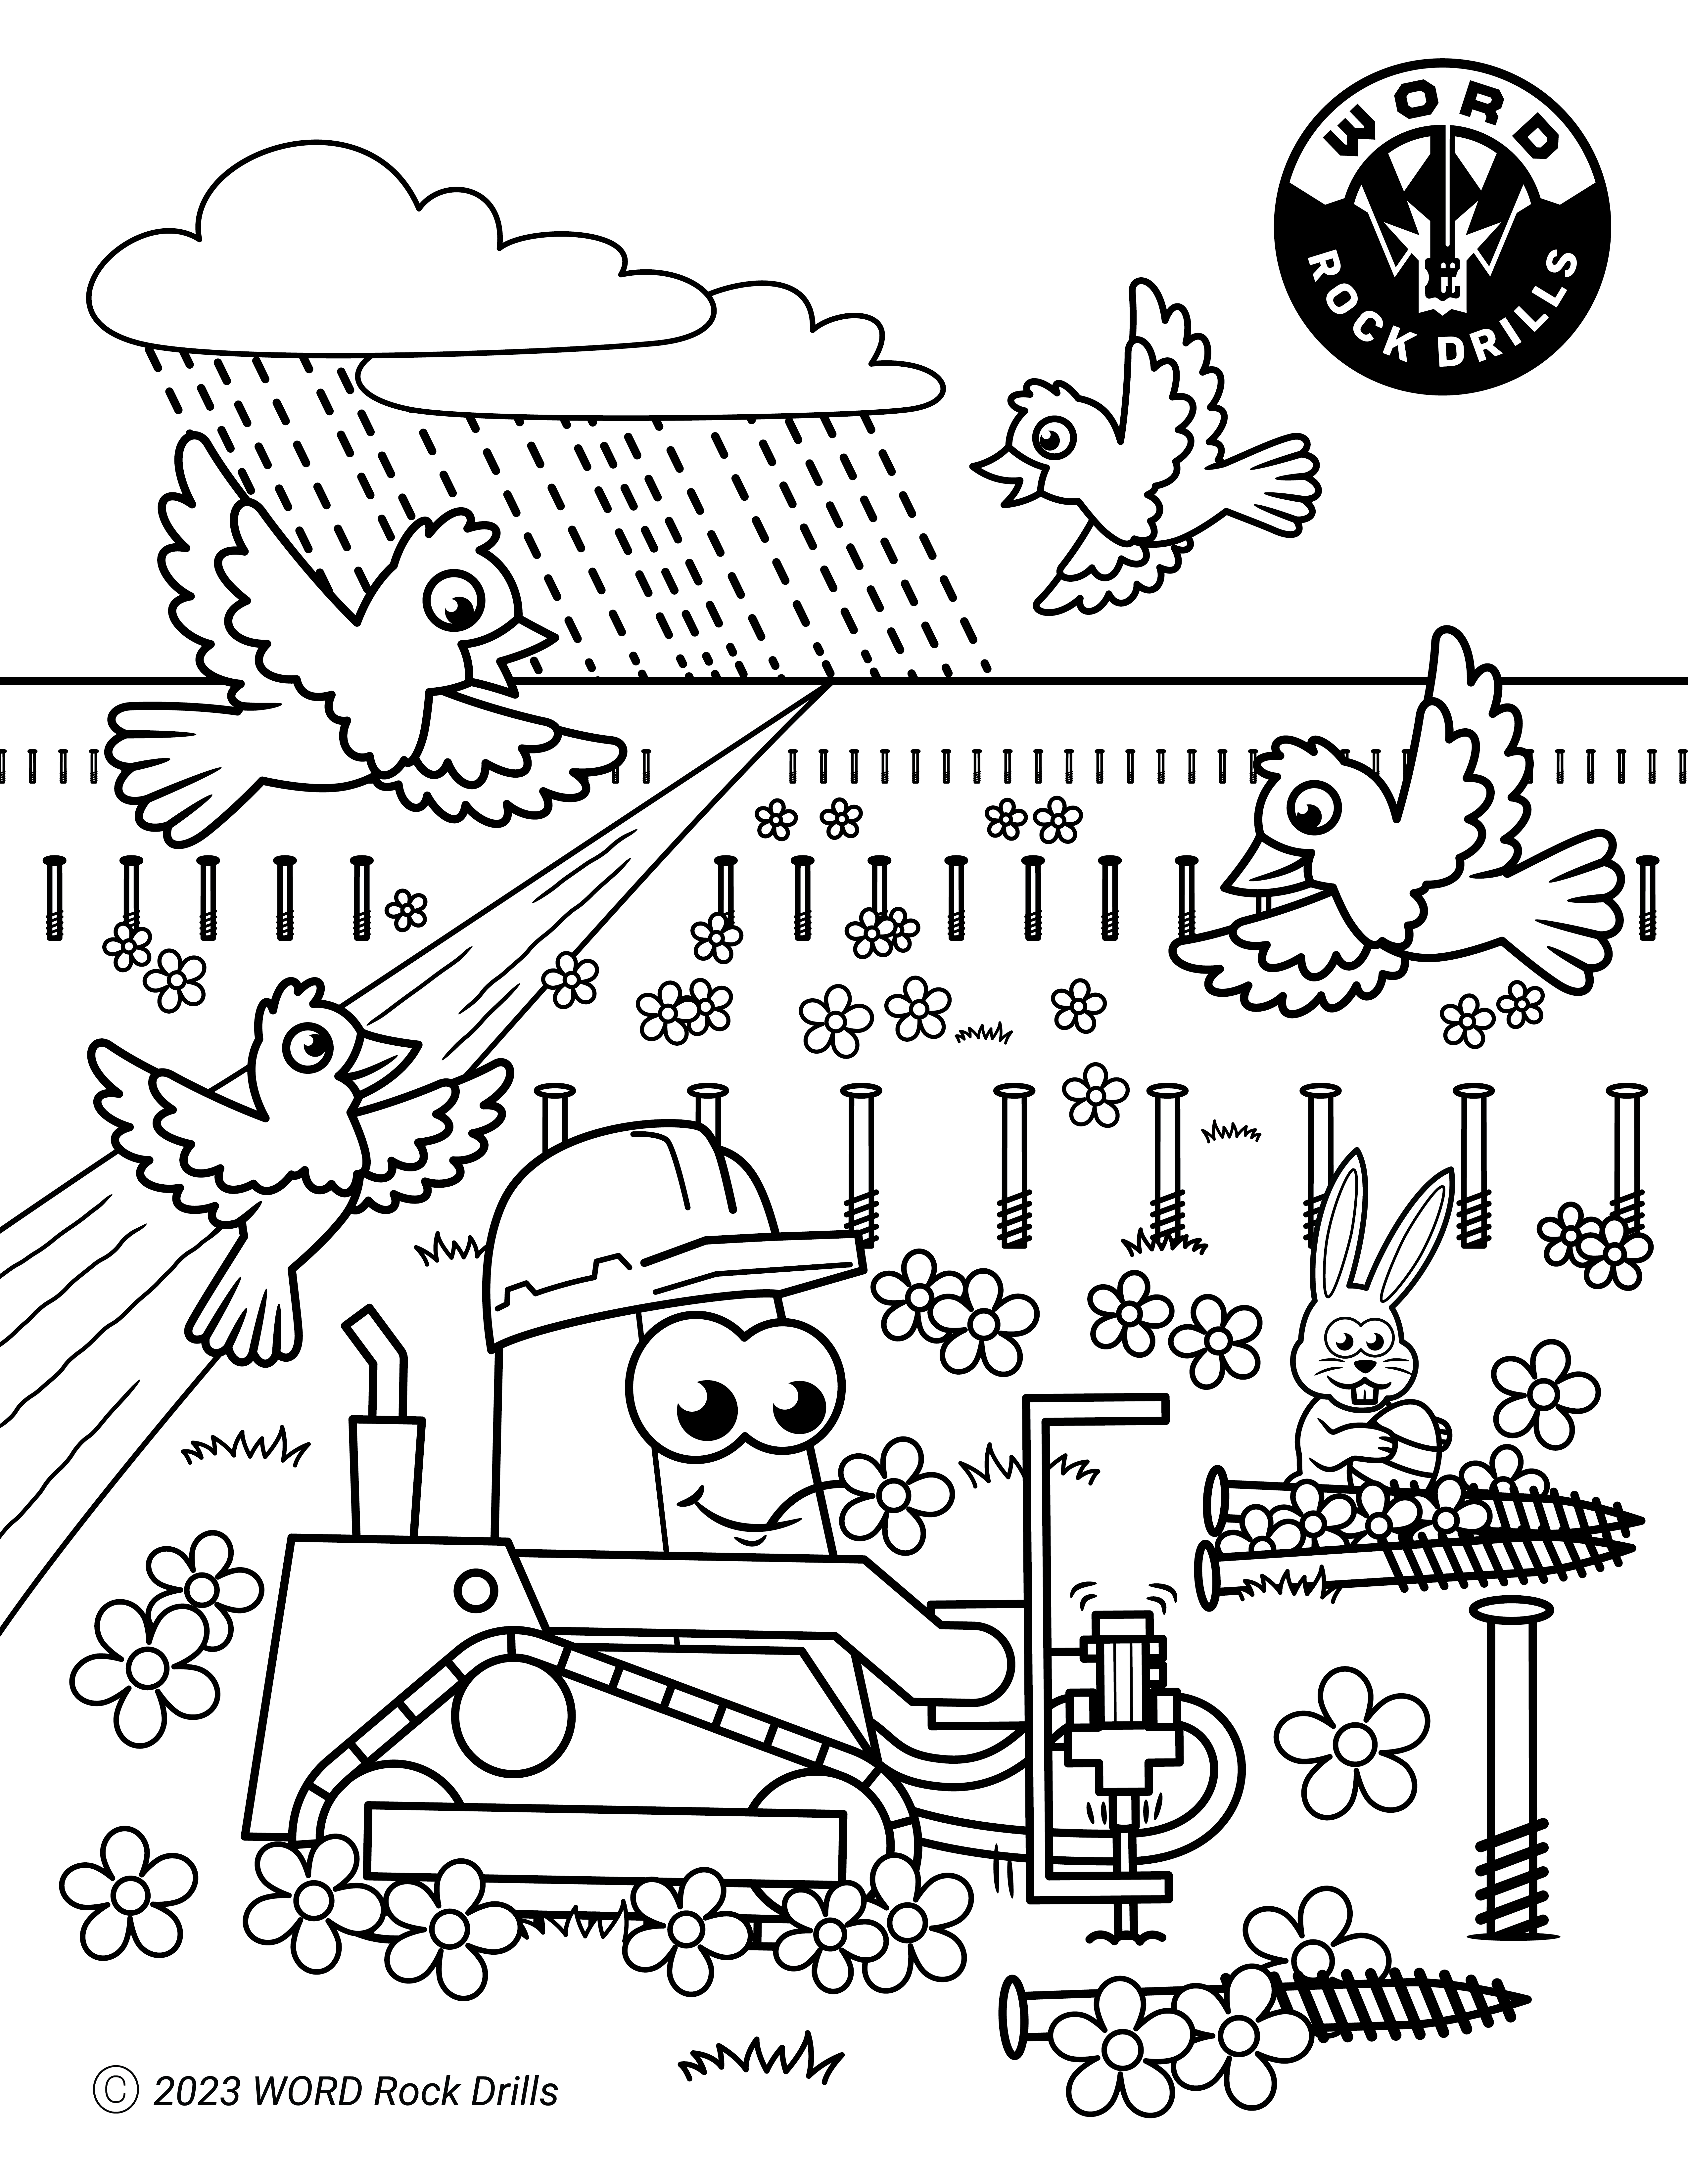 Coloring Pages For Kids And Adults in 2023